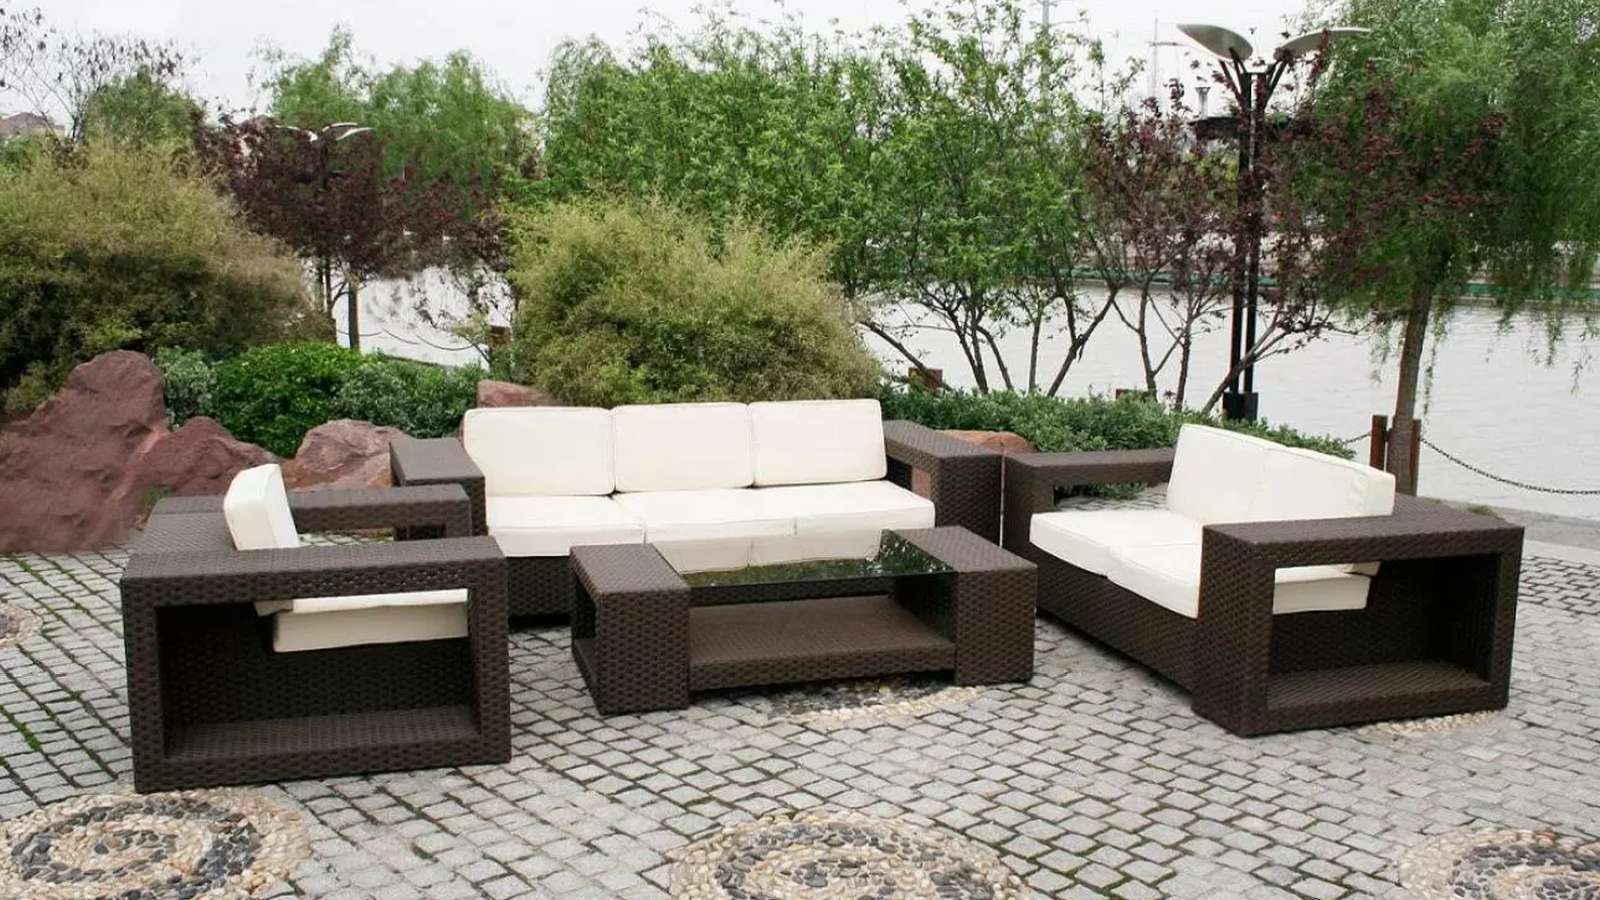 Some Ideas Of Contemporary Outdoor Furniture With Simple Design